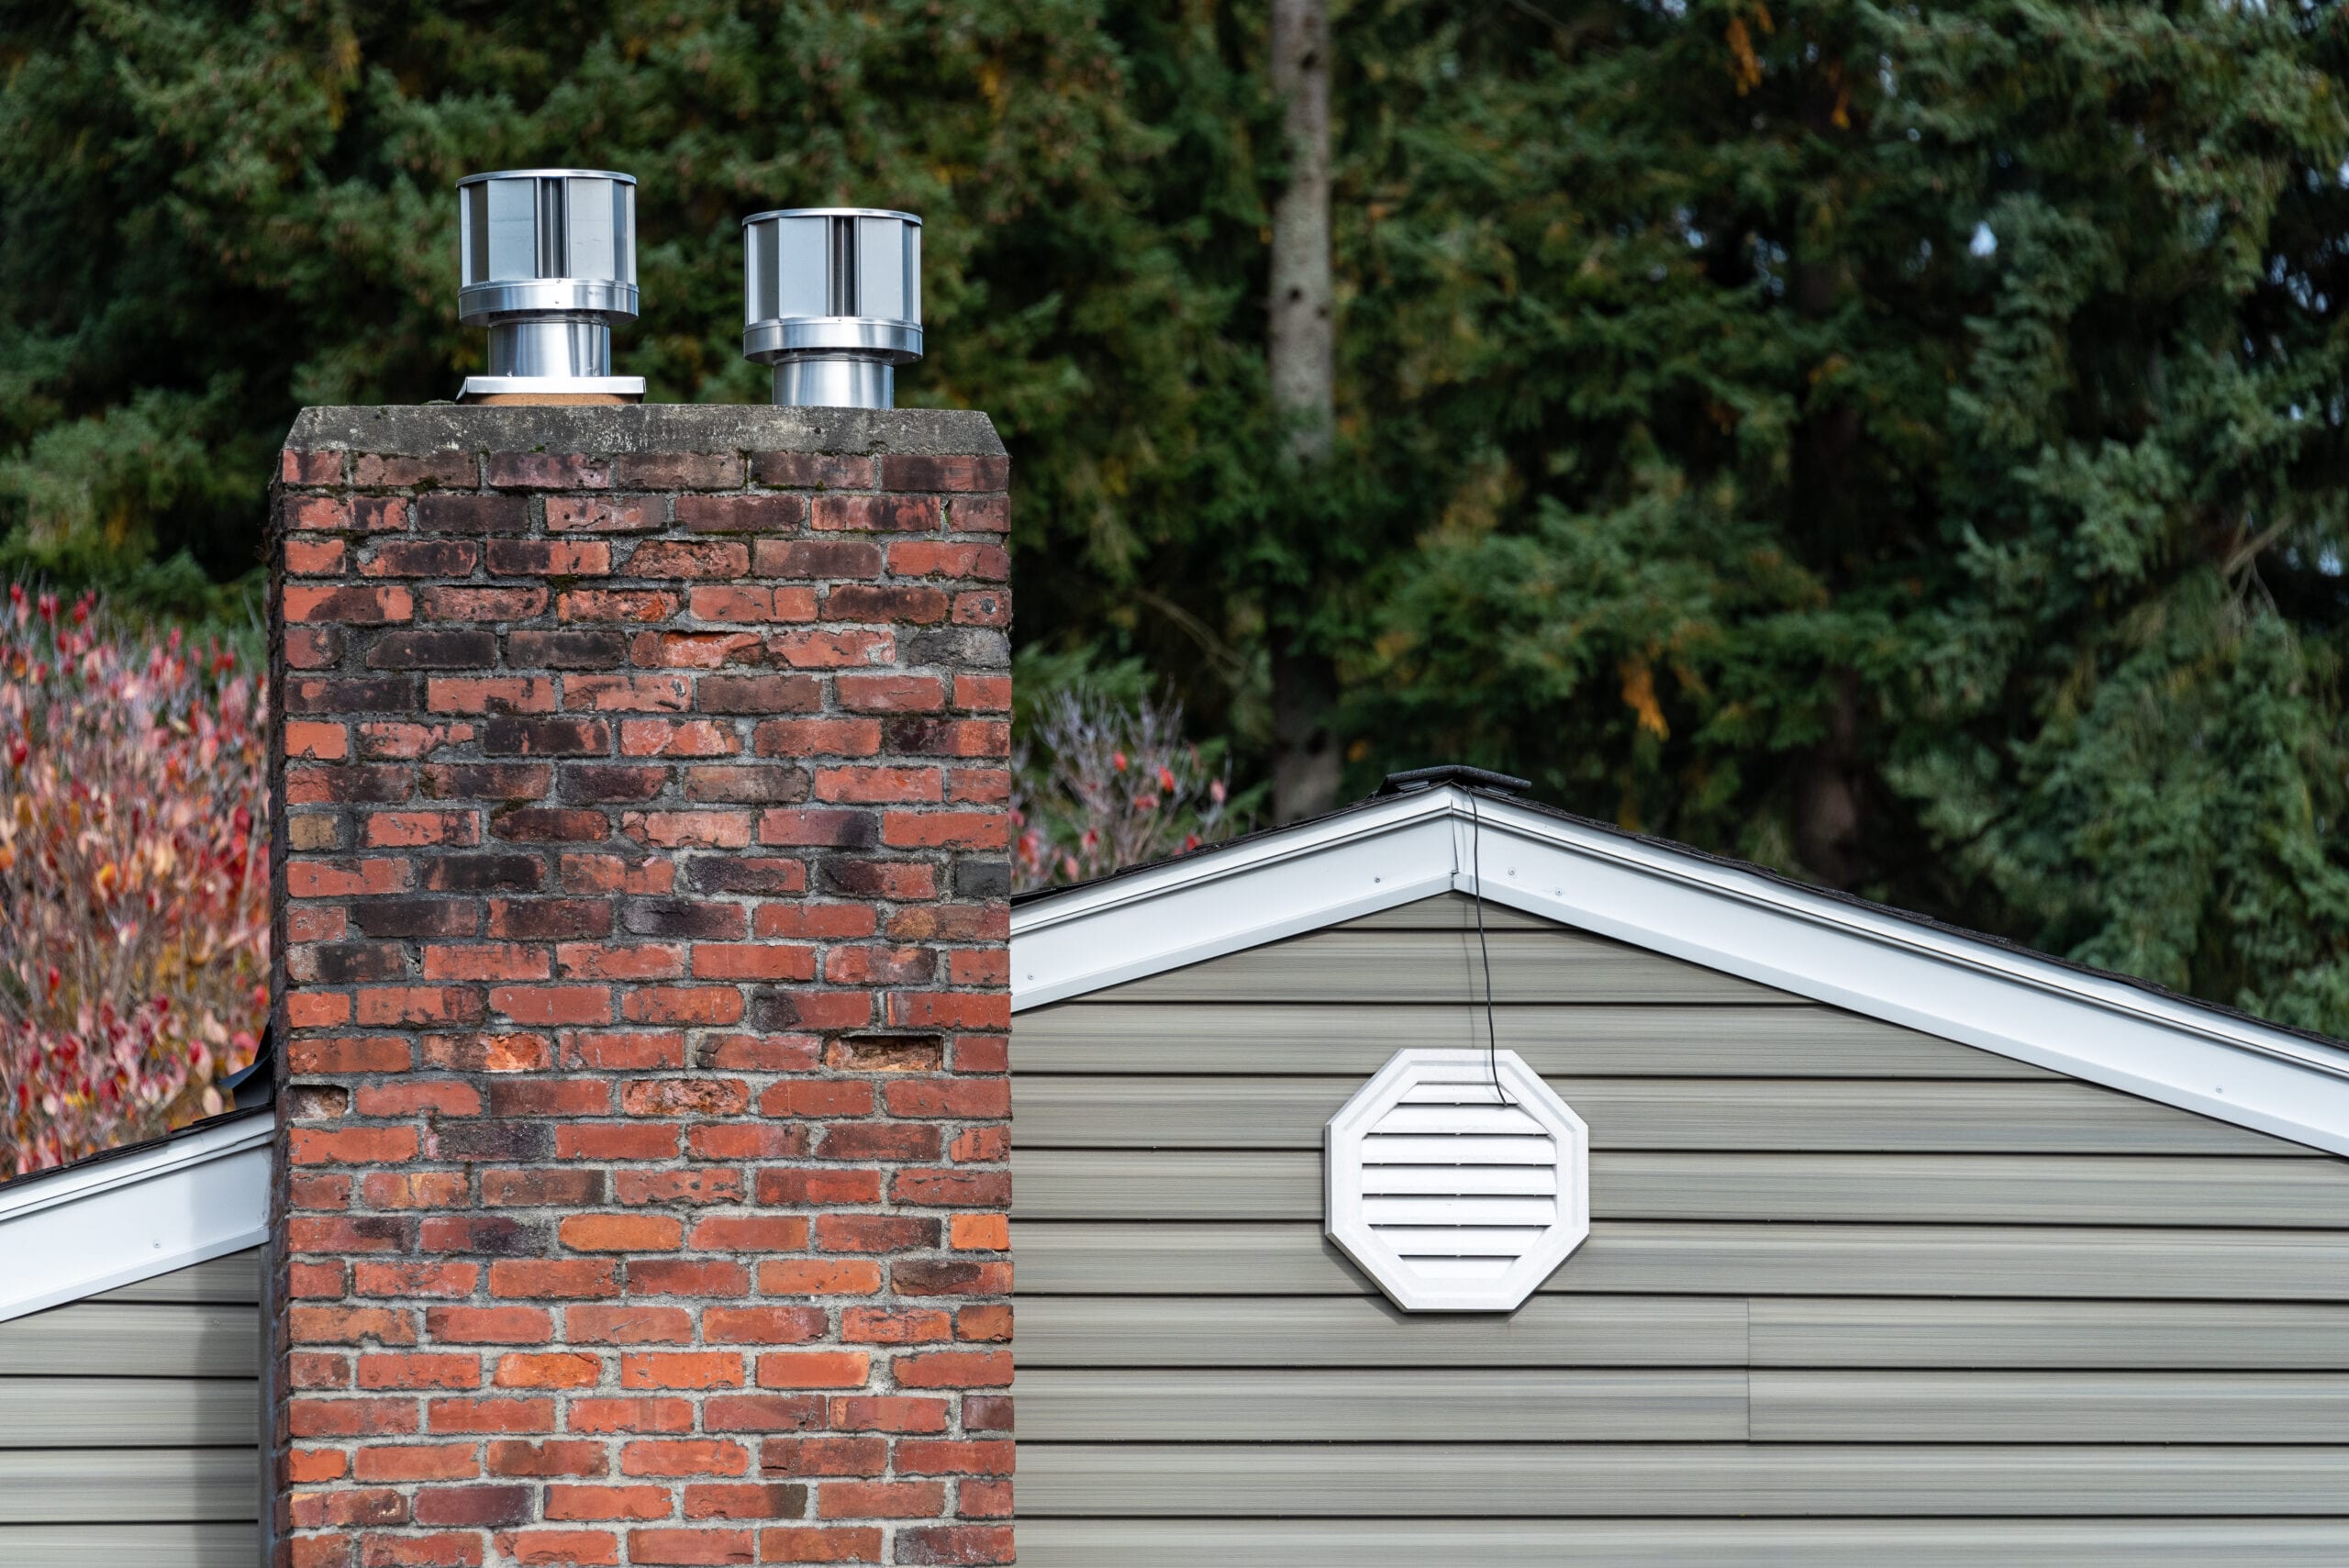 Exterior wall of suburban house, old brick chimney with chimney vents, attic gable fan exhaust vent on wall